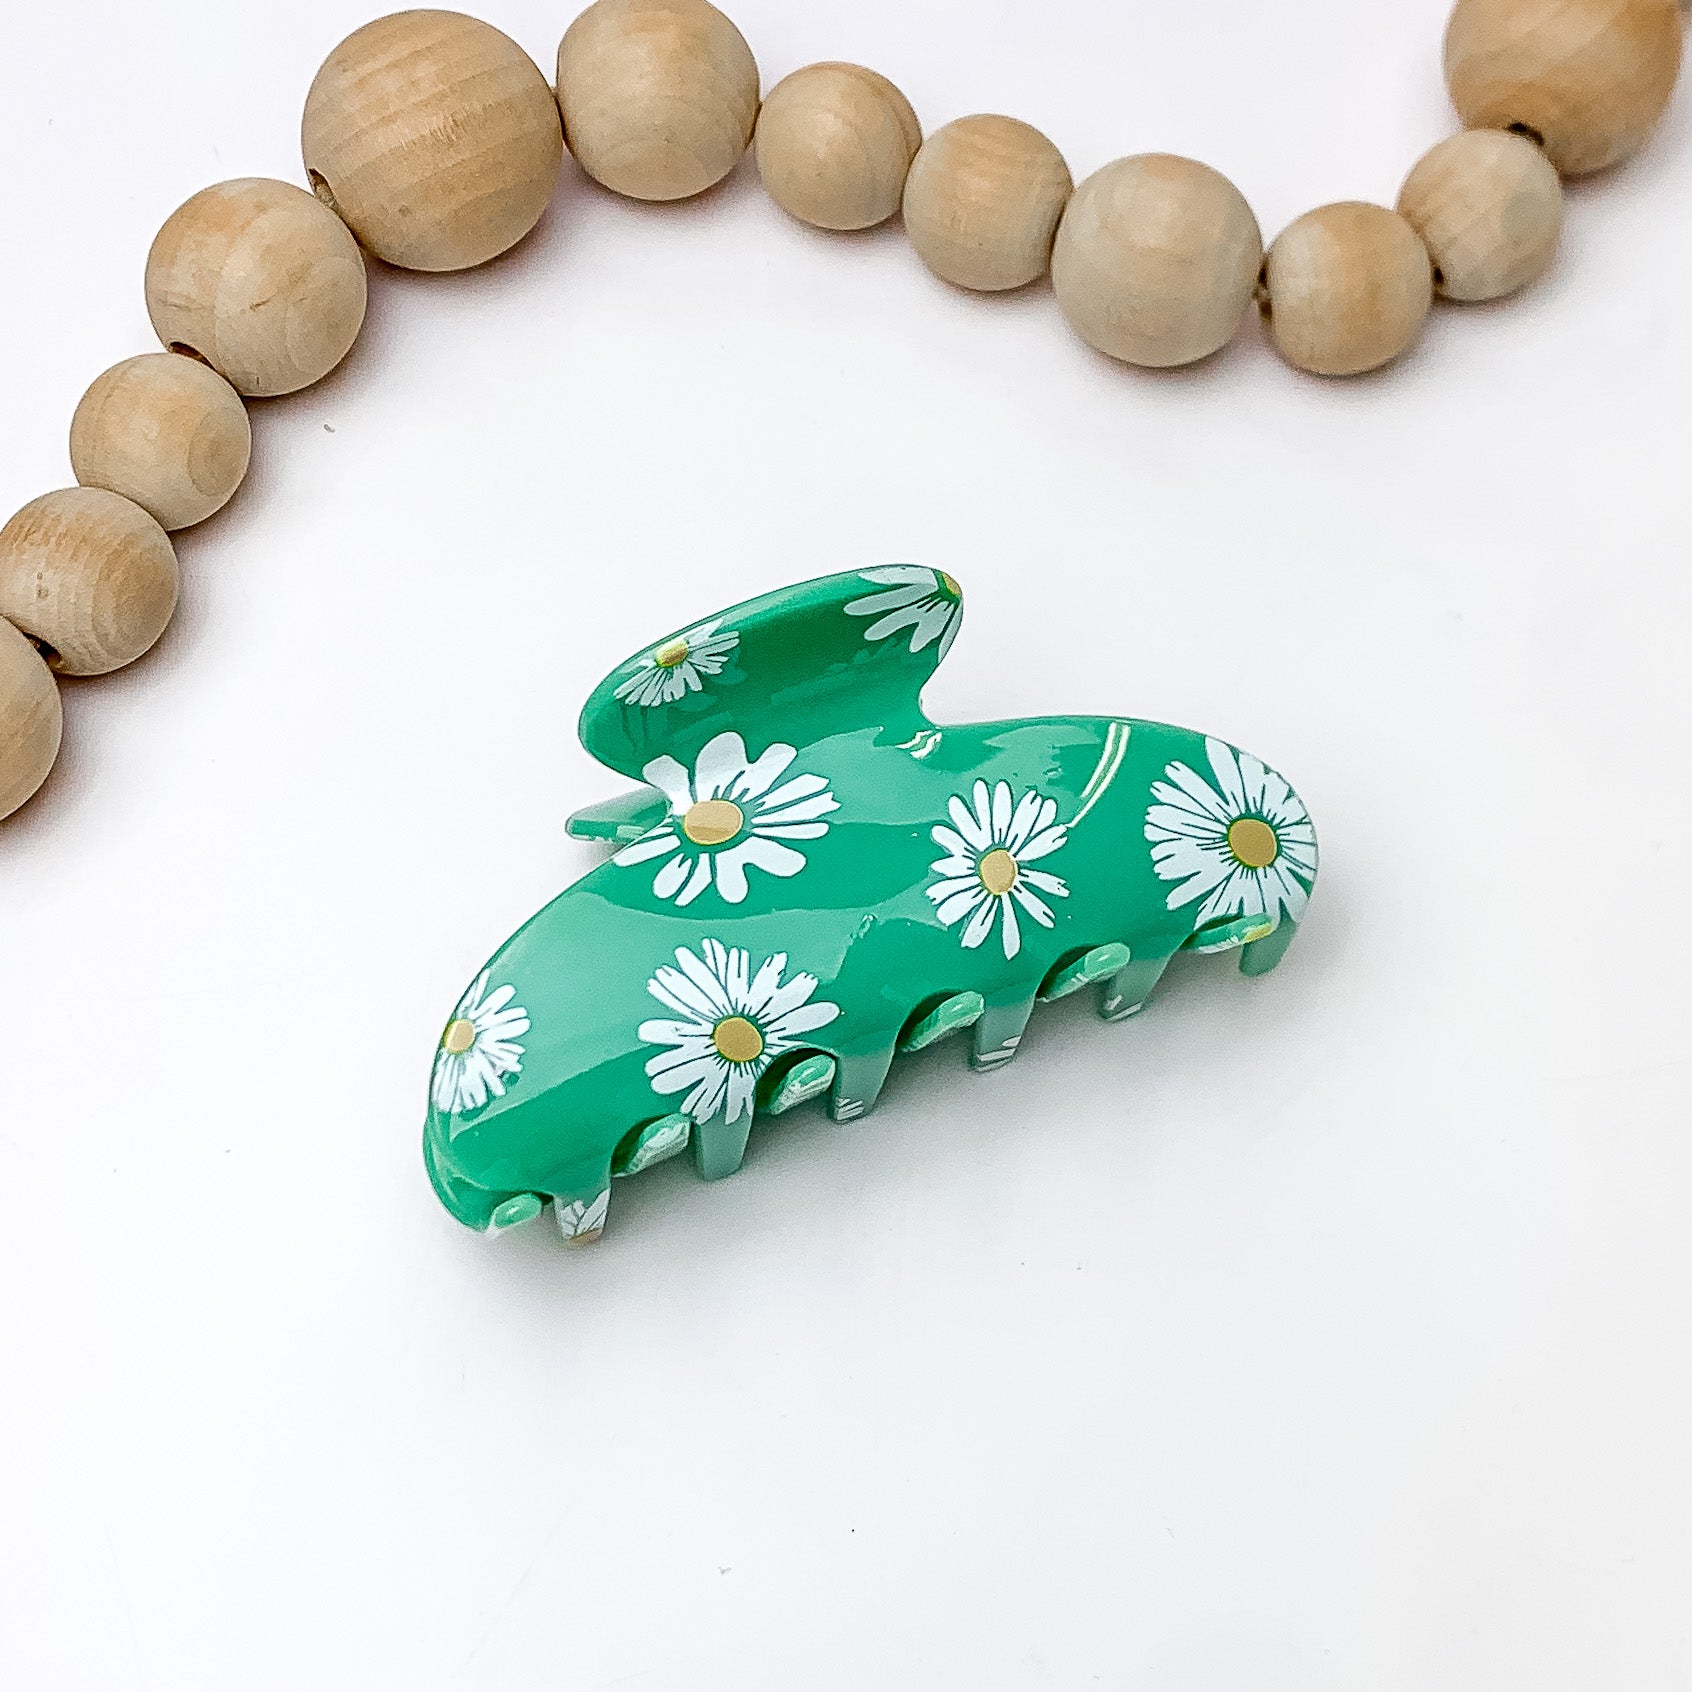 Flower Fields Hair Clip in Sage Green. Pictured on a white background with wood beads above the hair clip.